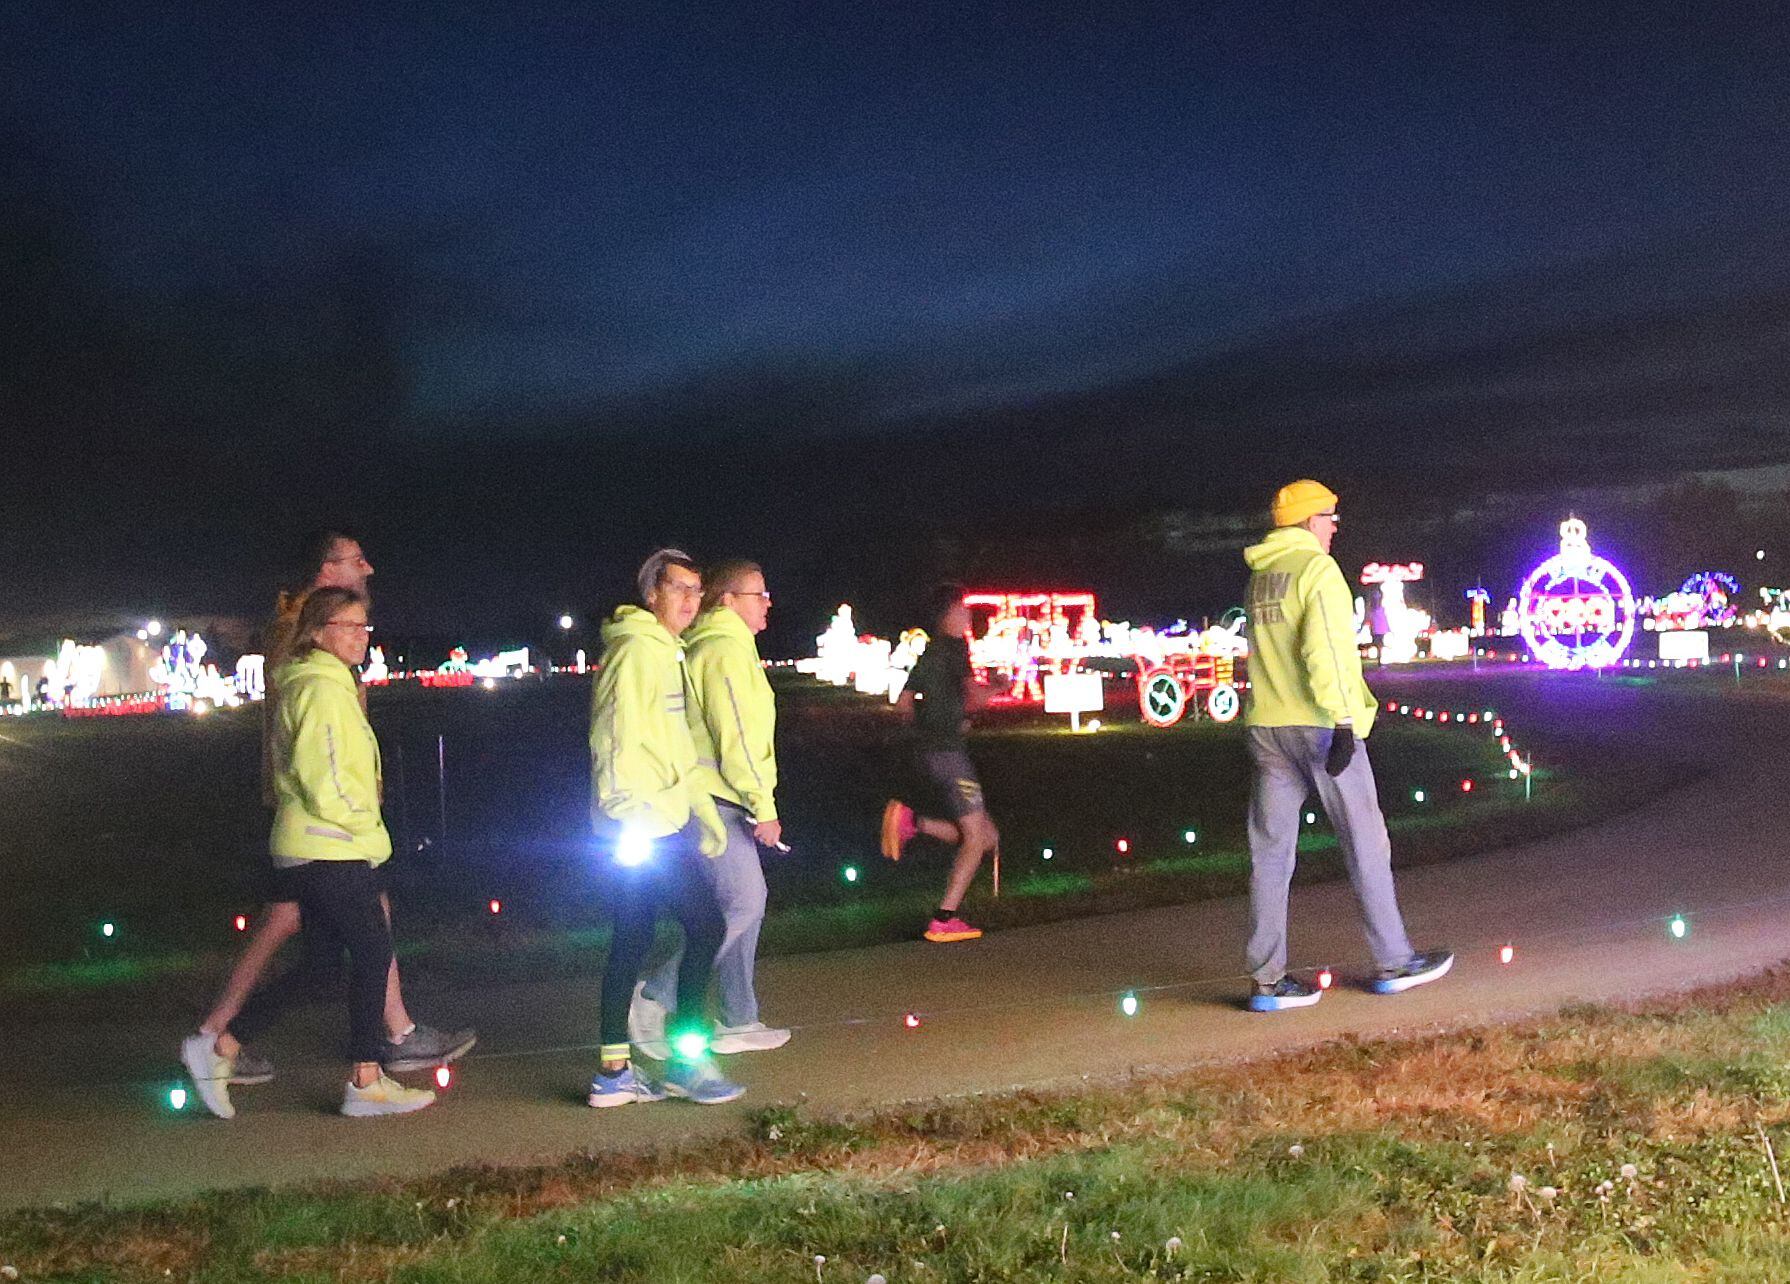 Participants make their way through the Run Run Rudolph 5K Fun Run on Sunday, Nov. 5, 2023 at Rotary Park in La Salle. The Celebration Of Lights is the area’s largest drive-thru Christmas light display, stretching throughout Rotary Park on the east side of La Salle.